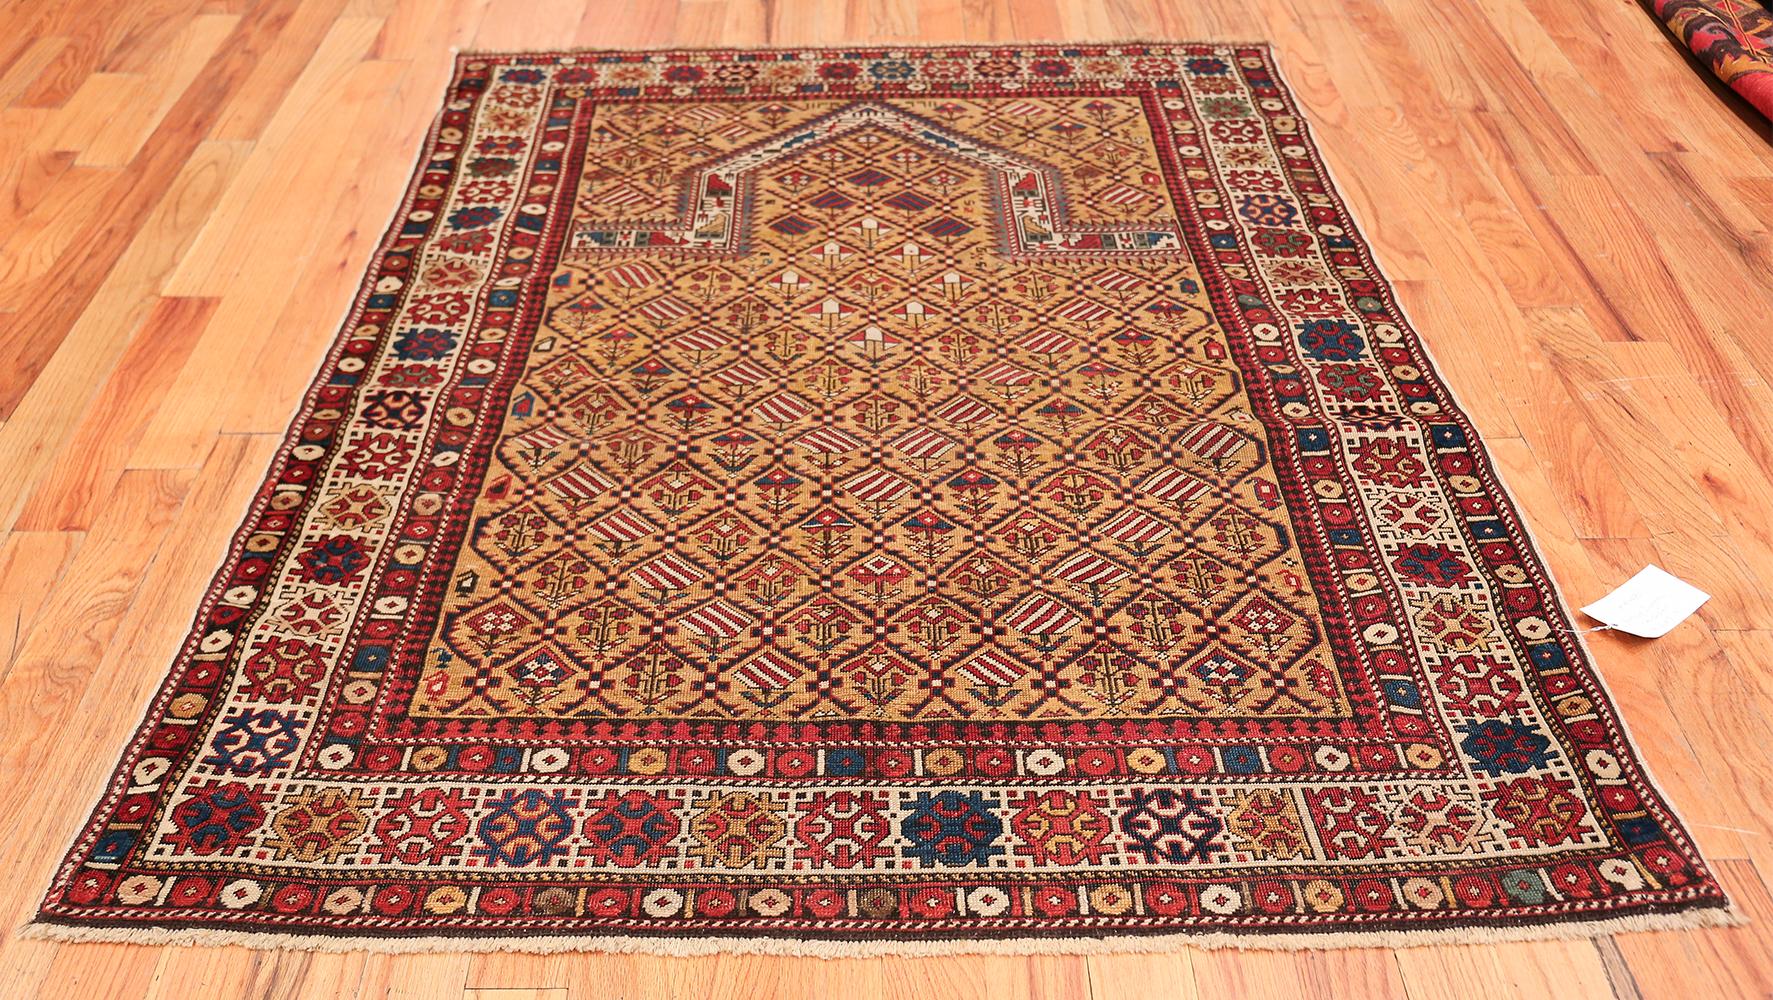 Magnificent antique prayer design Caucasian Dagestan rug, country of origin / rug. Type: Caucasian rug, circa 1890. Size: 4 ft 5 in x 5 ft 10 in (1.35 m x 1.78 m)

This magnificent Caucasian Dagestan rug is an excellent example of what a beautiful